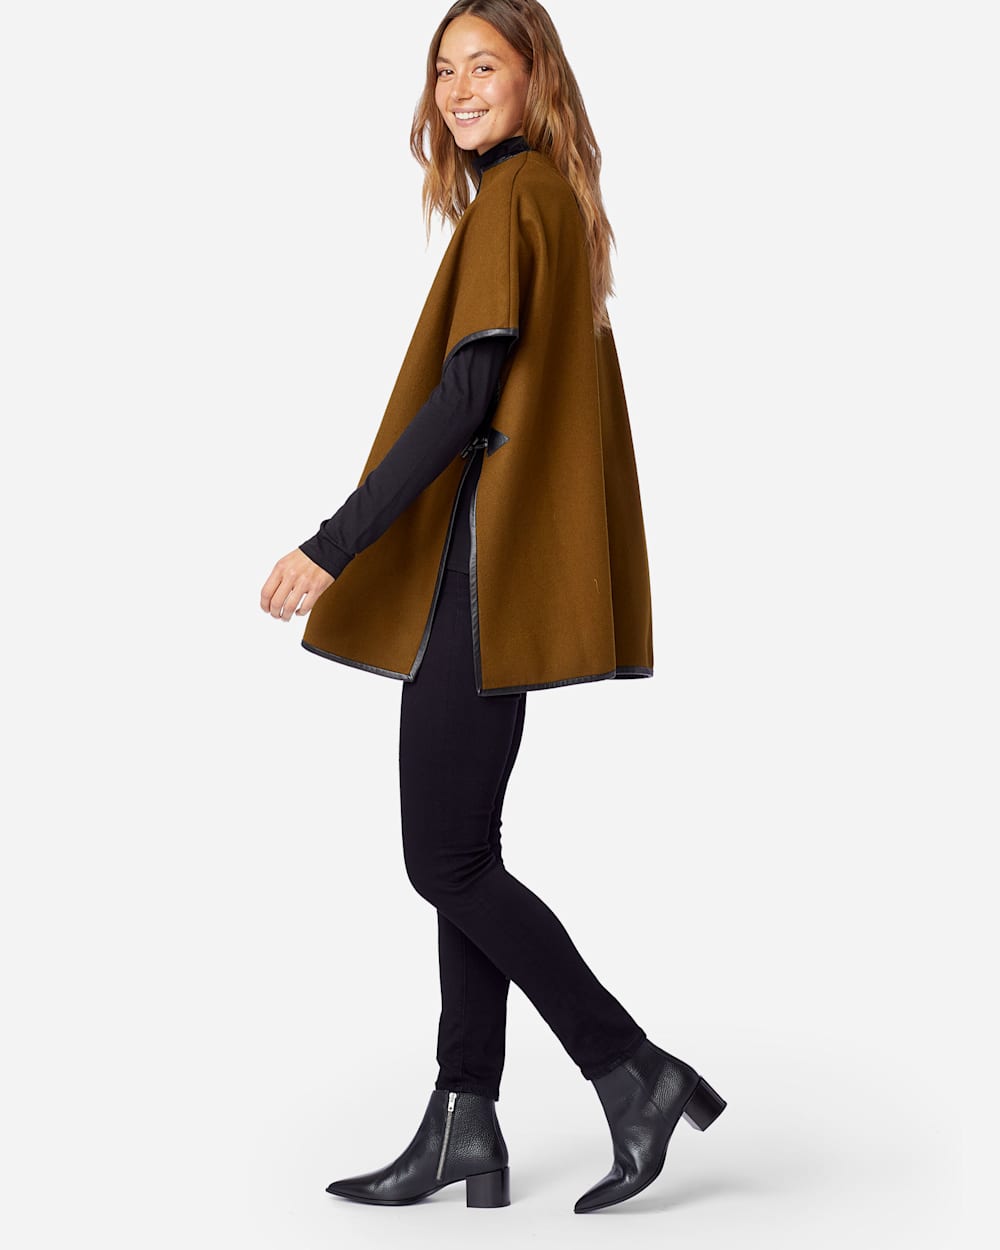 ALTERNATE VIEW OF WOMEN'S LEATHER TRIM ECO-WISE WOOL CAPE IN SMOKY OLIVE image number 2